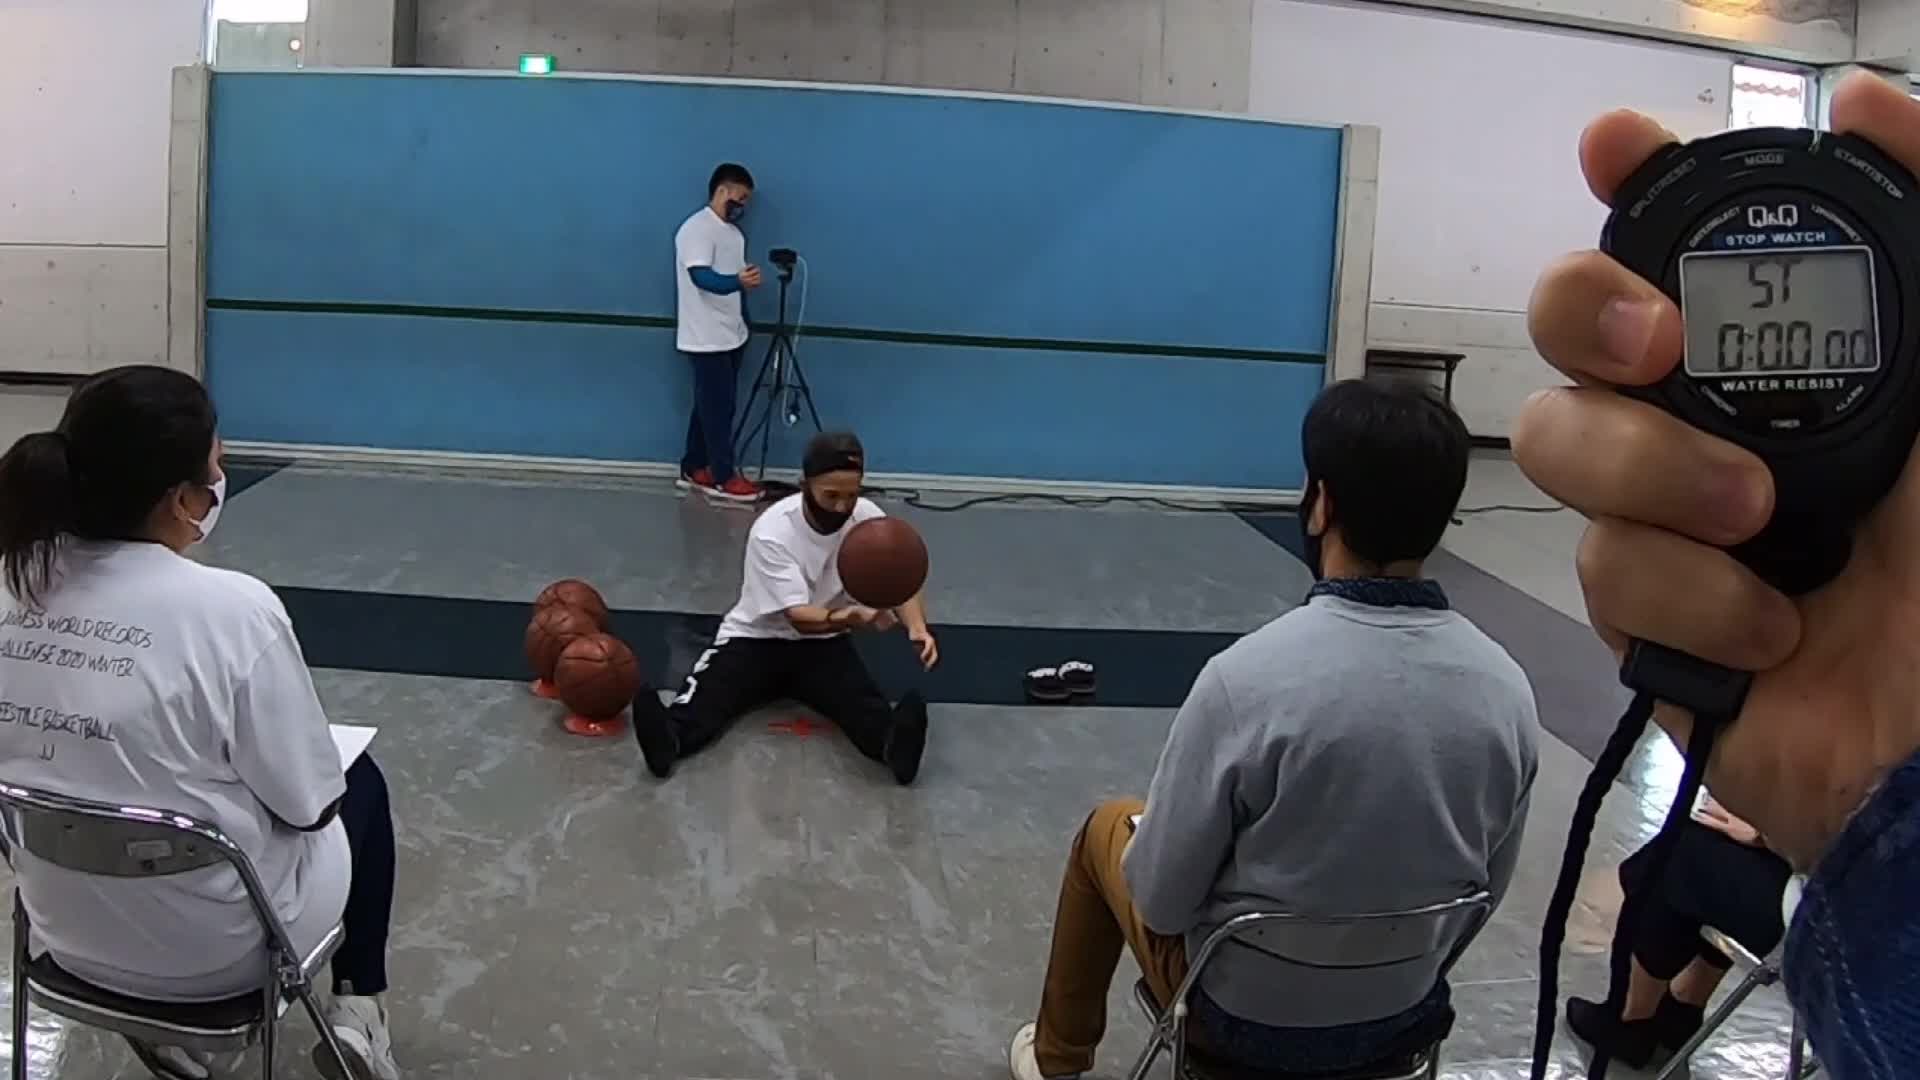 Freestyle Basketball Player Balances Four Balls Watch Now for Free